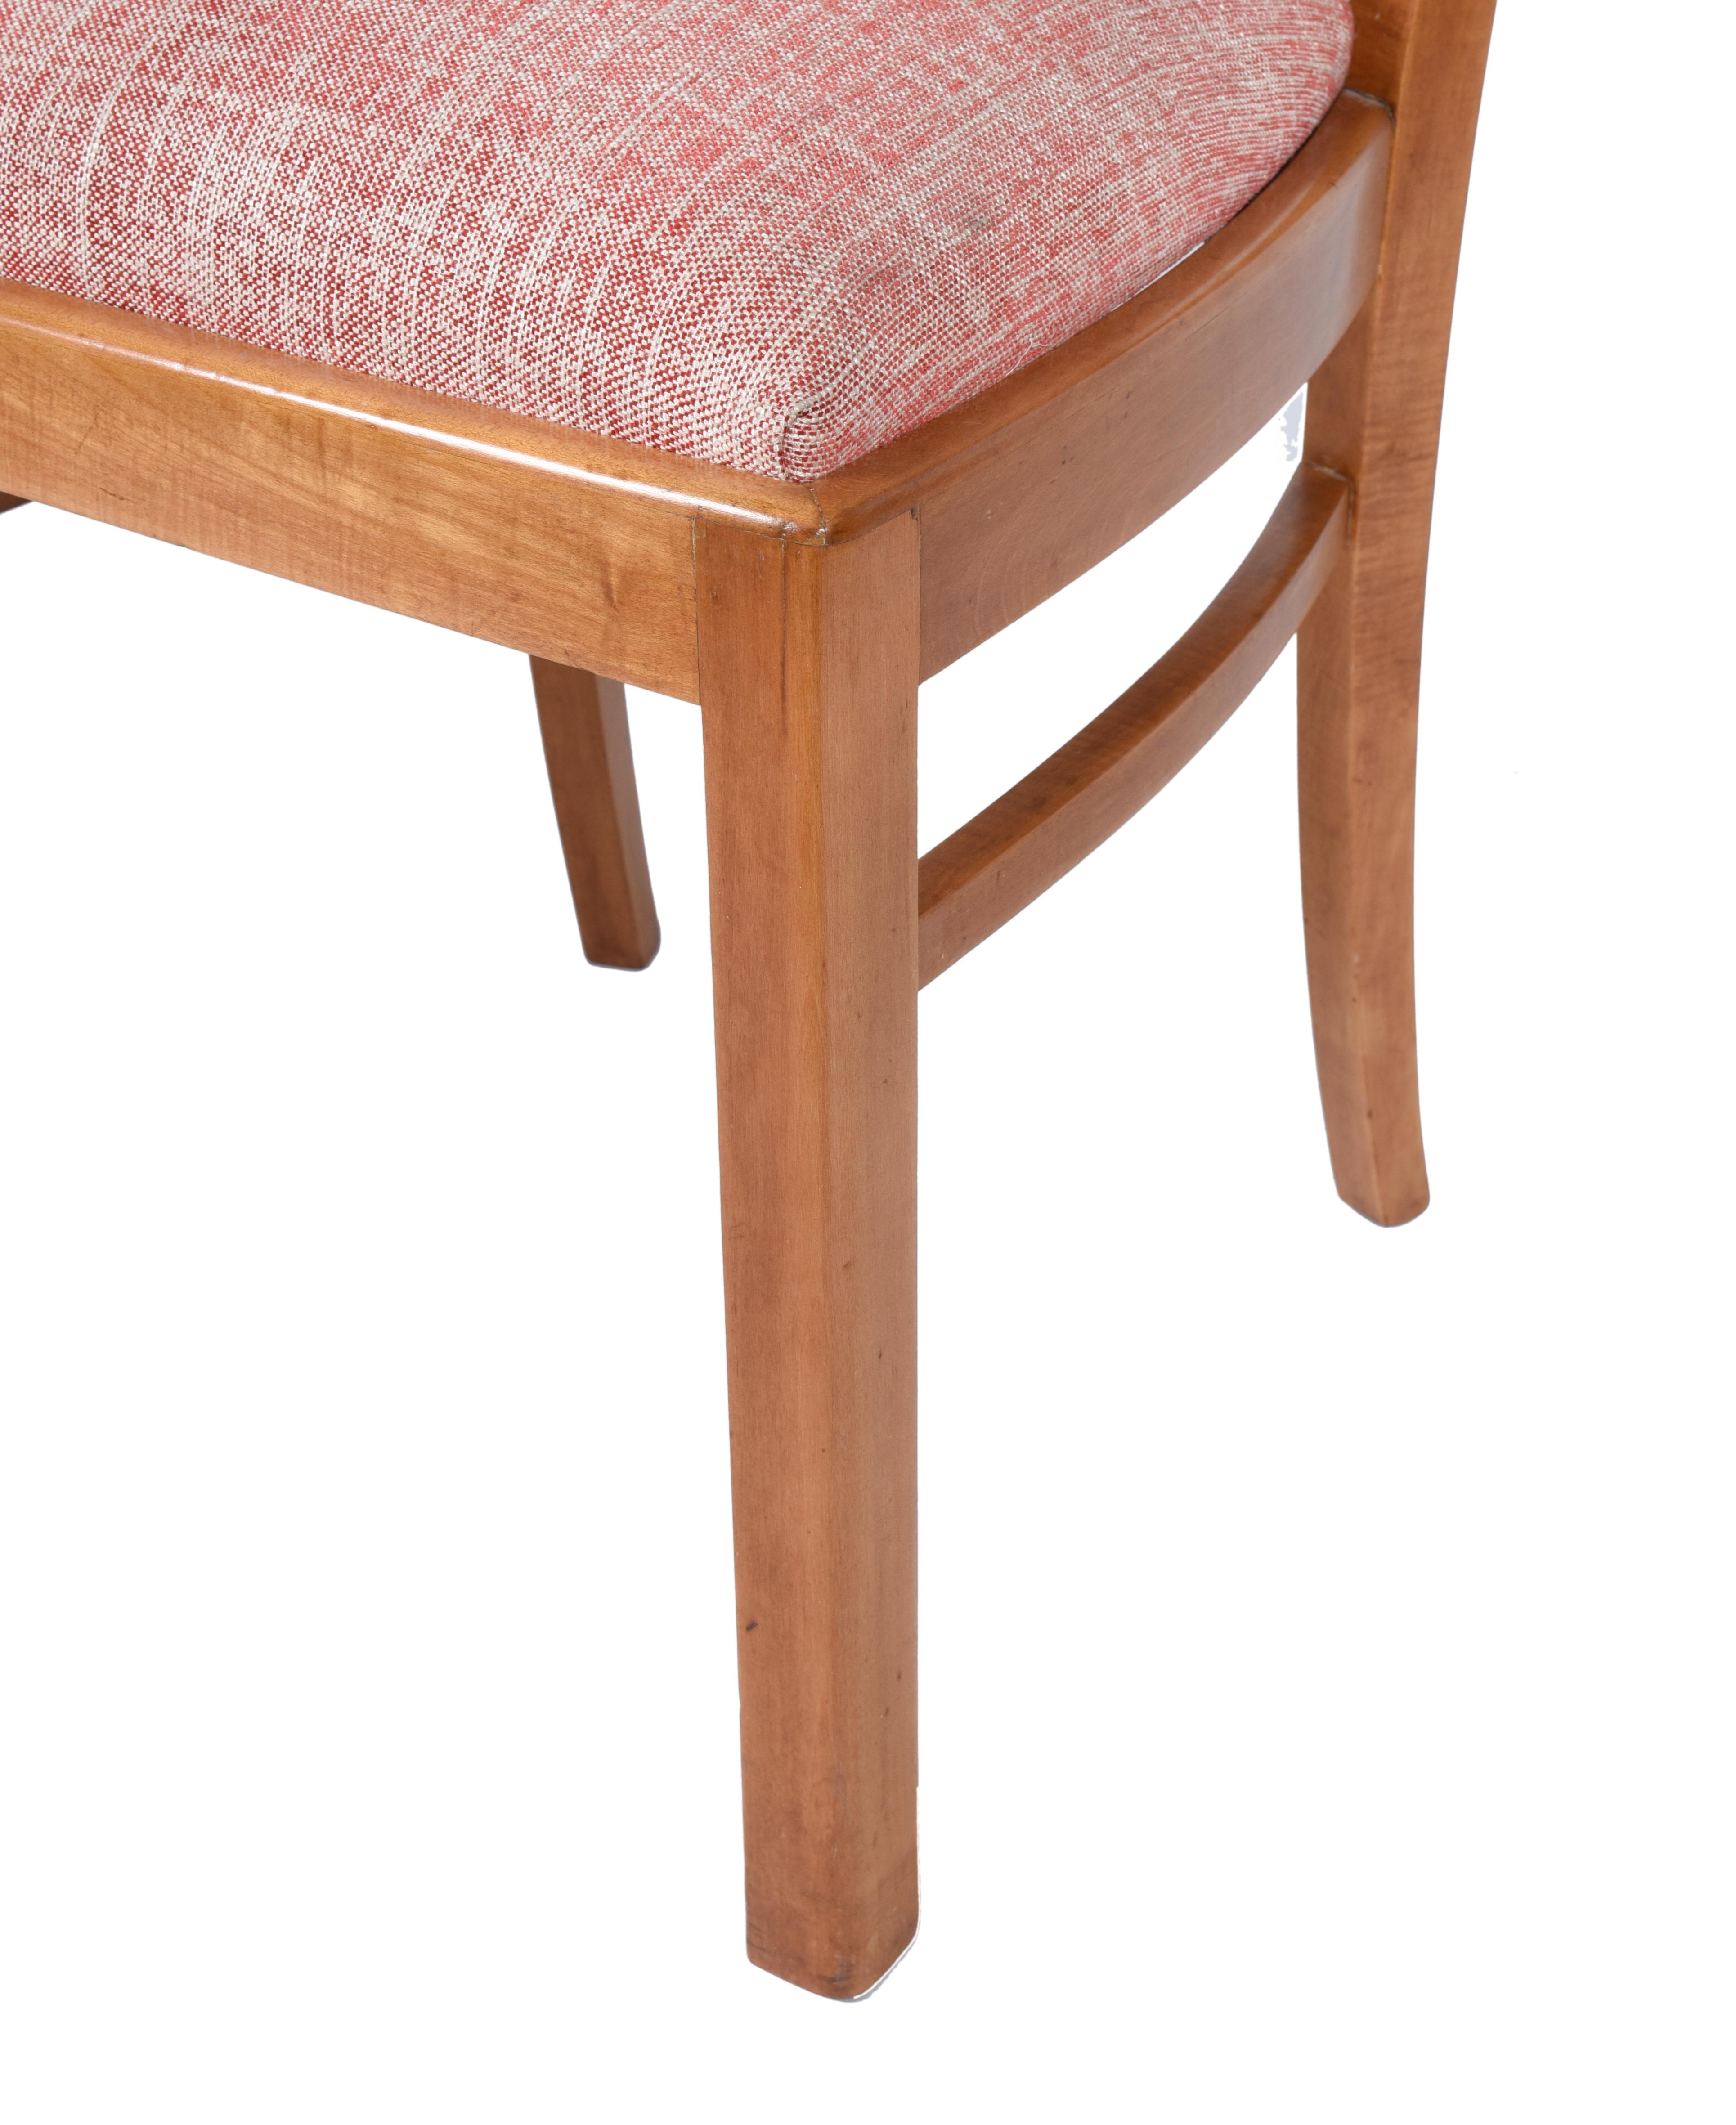 20th Century Midcentury Brazilian Chair in Ivory Wood and Straw, 1960s For Sale